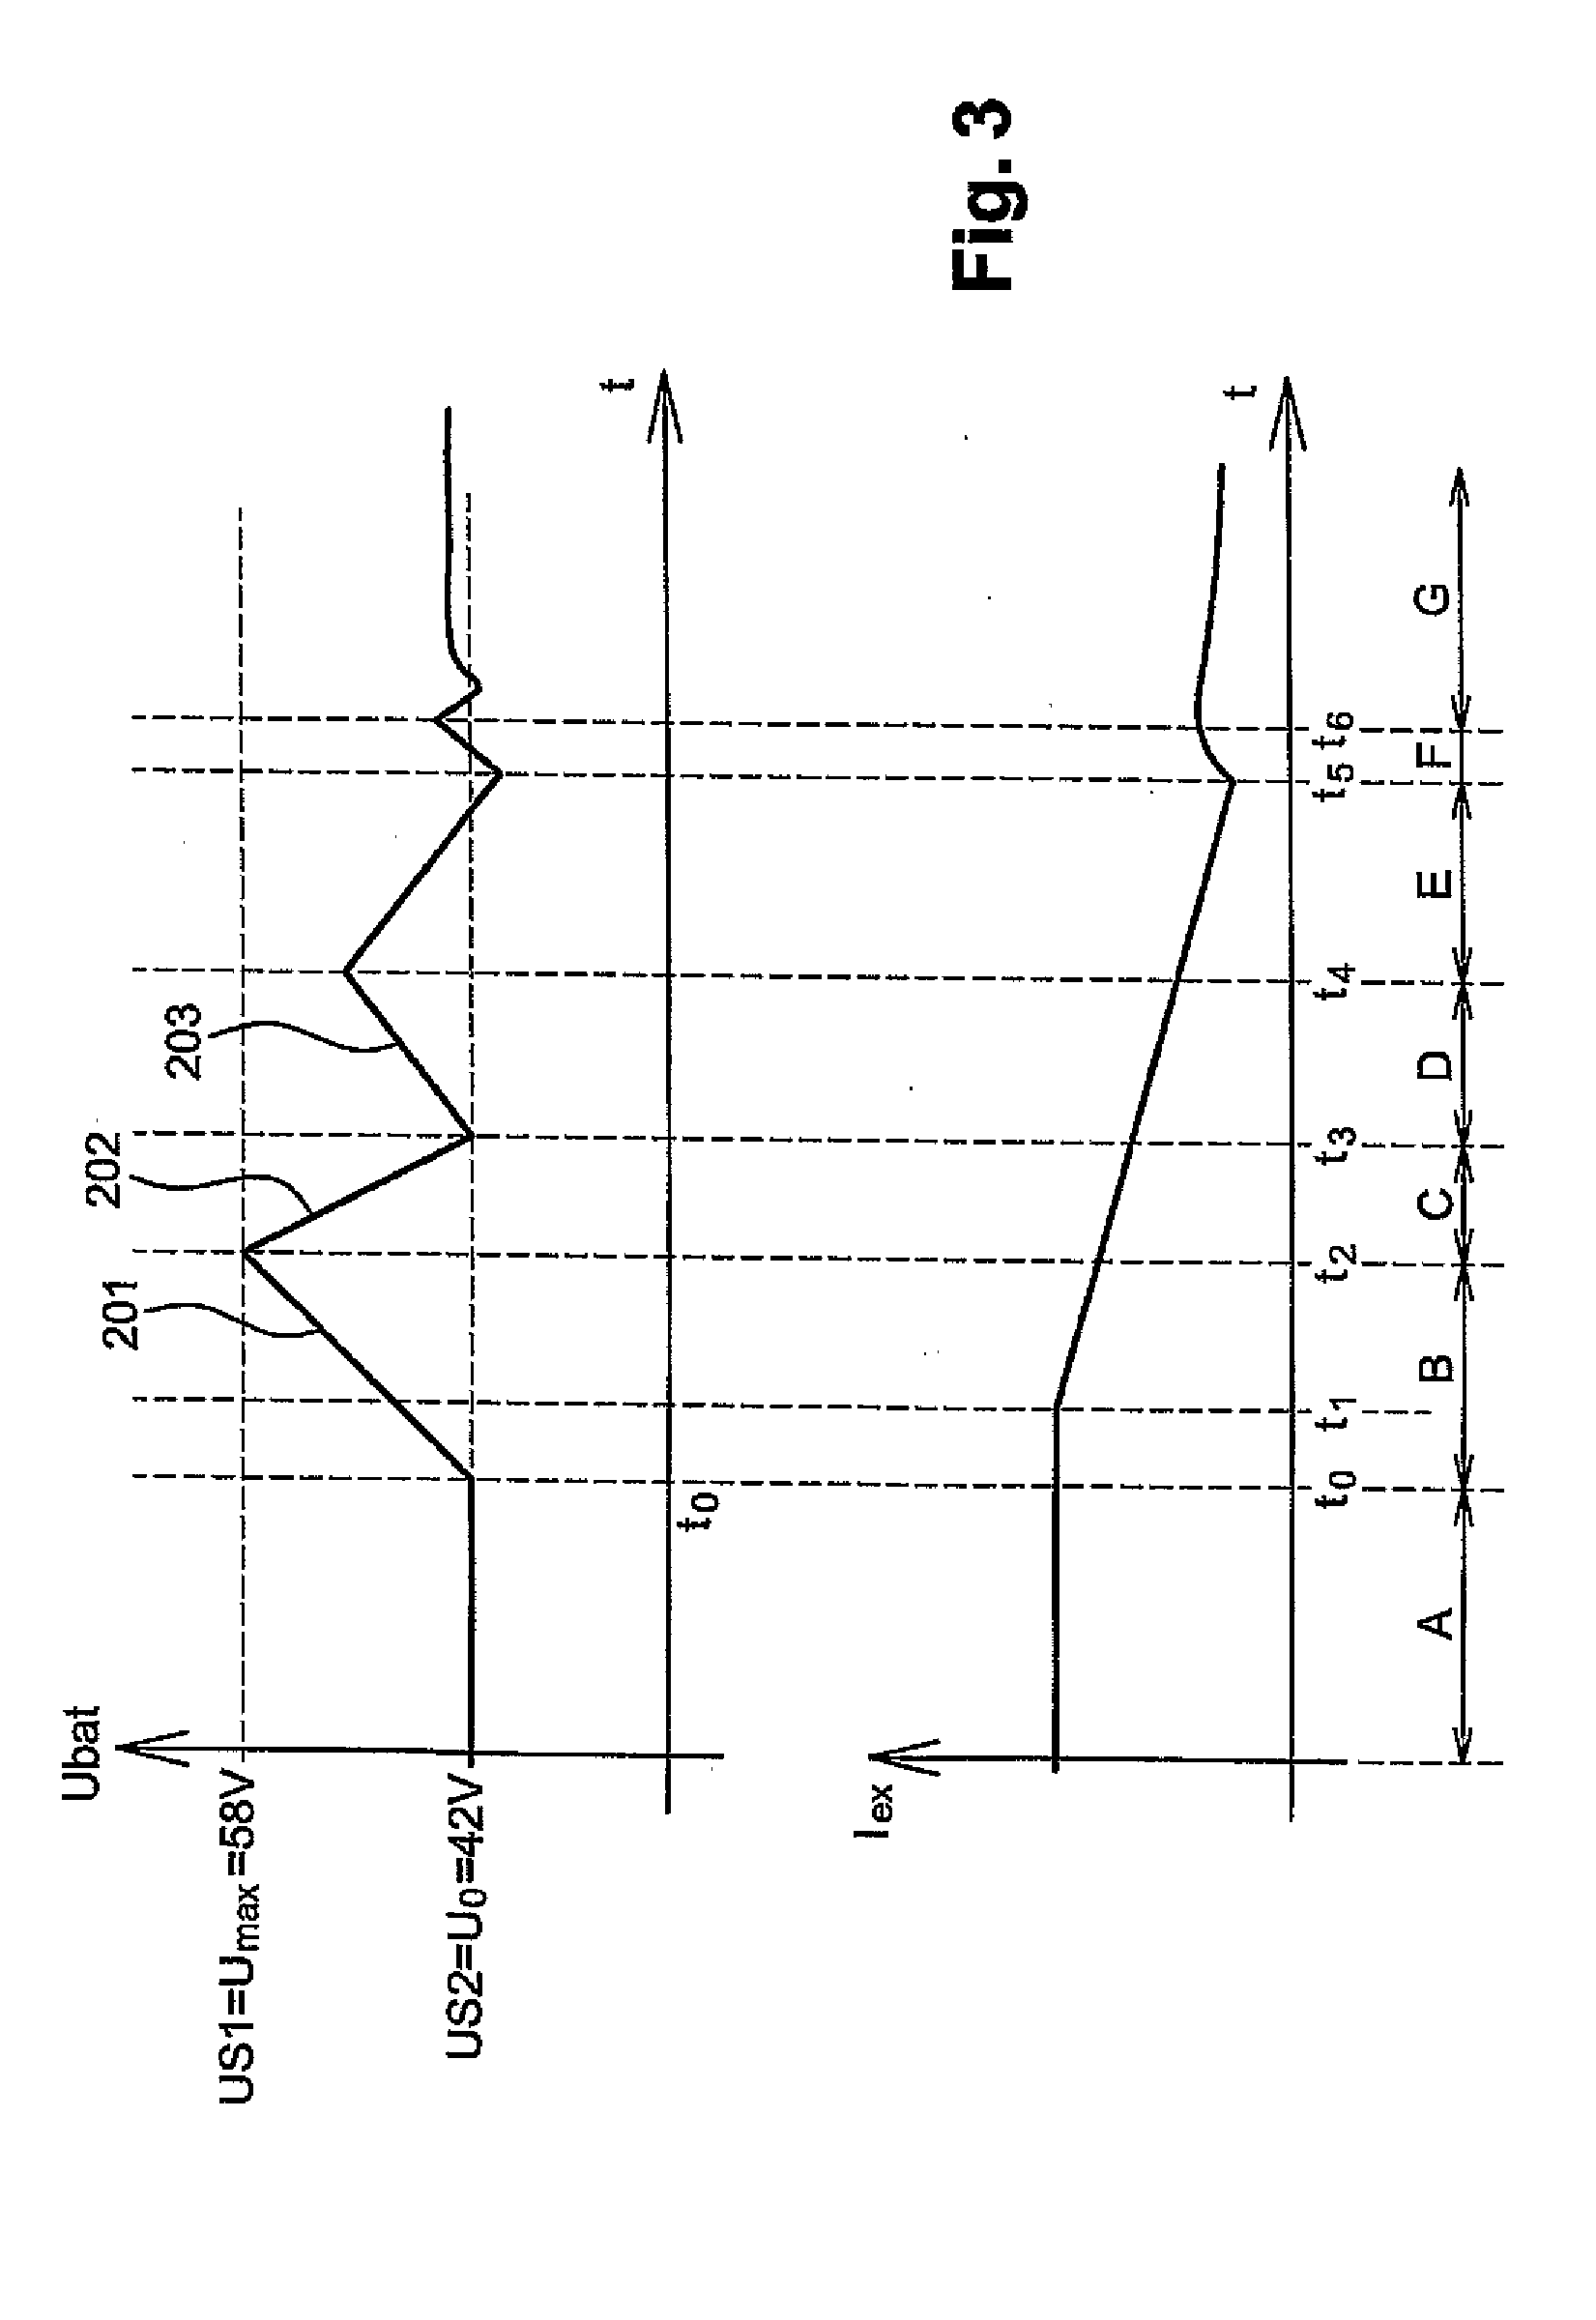 Control And Power Module For A Rotating Electrical Machine